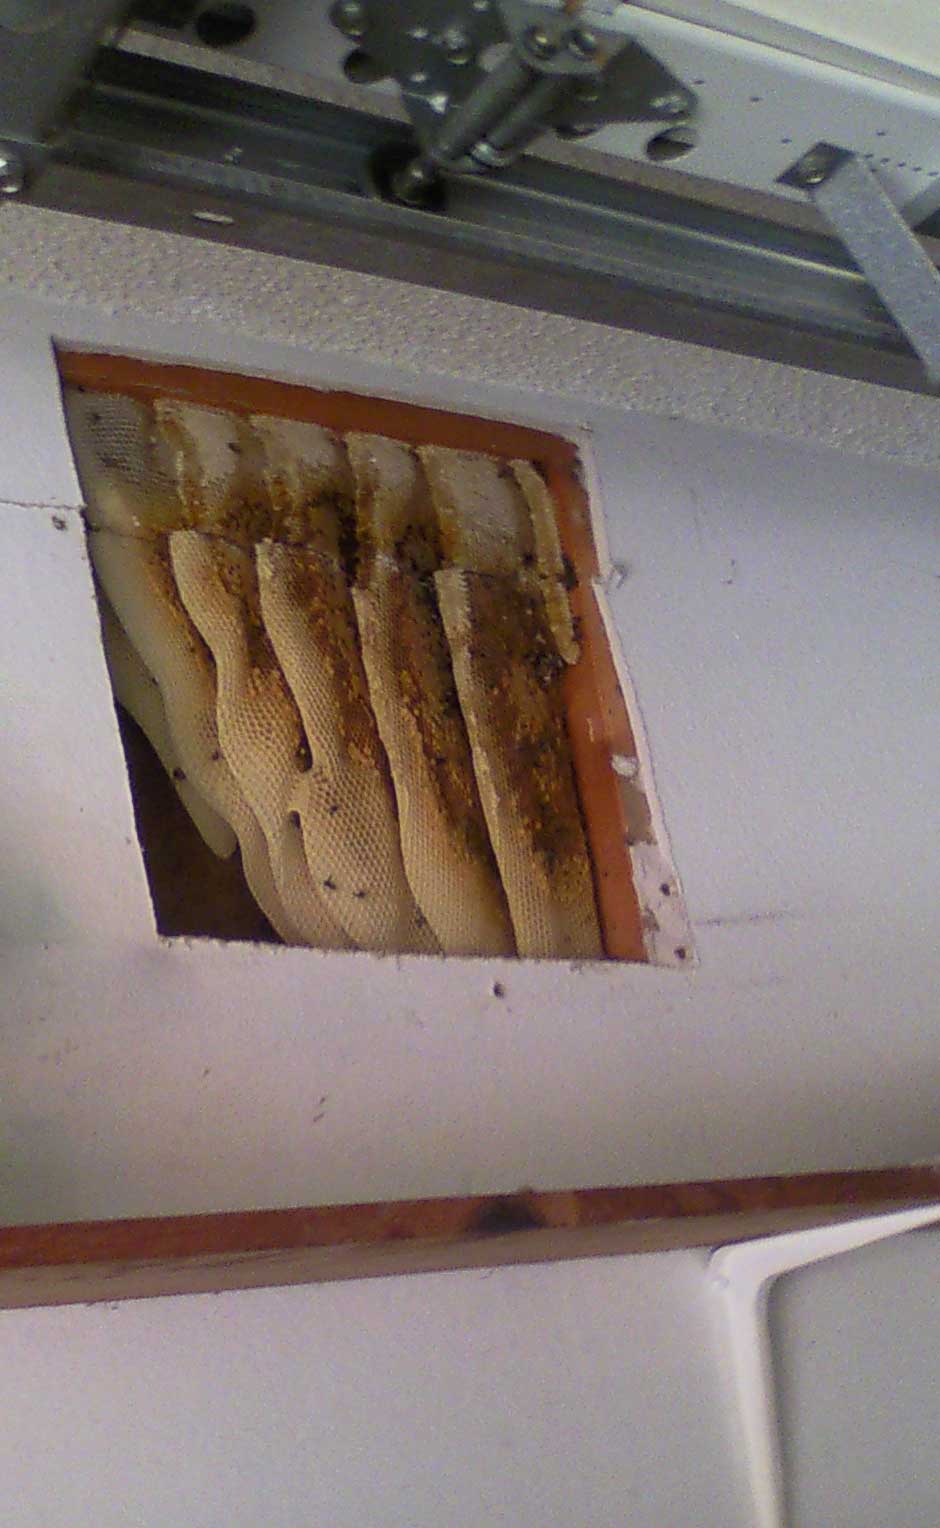 ALL Florida Recent Bee Removals: Sorrento Honey Bee infestation in Garage Wall How To Get Bees Out Of Garage